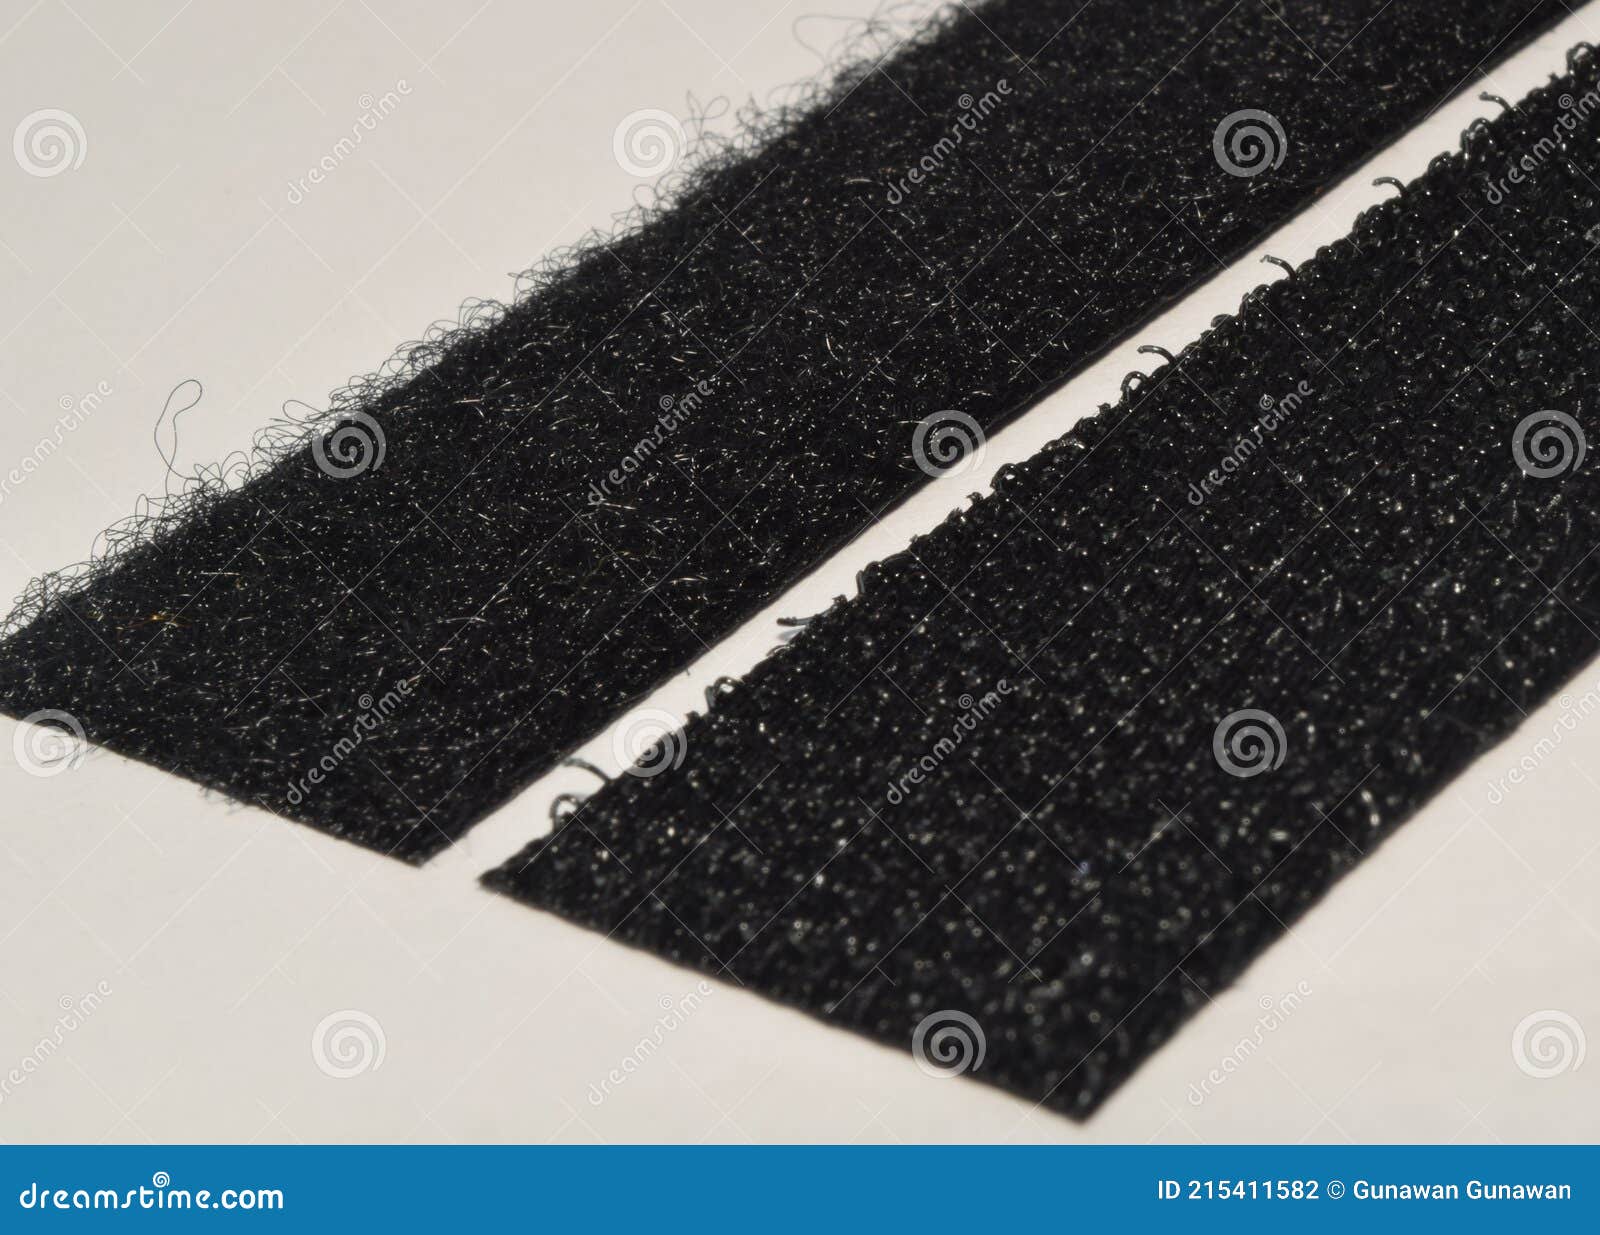 60+ Velcro Strips For Fabric Stock Photos, Pictures & Royalty-Free